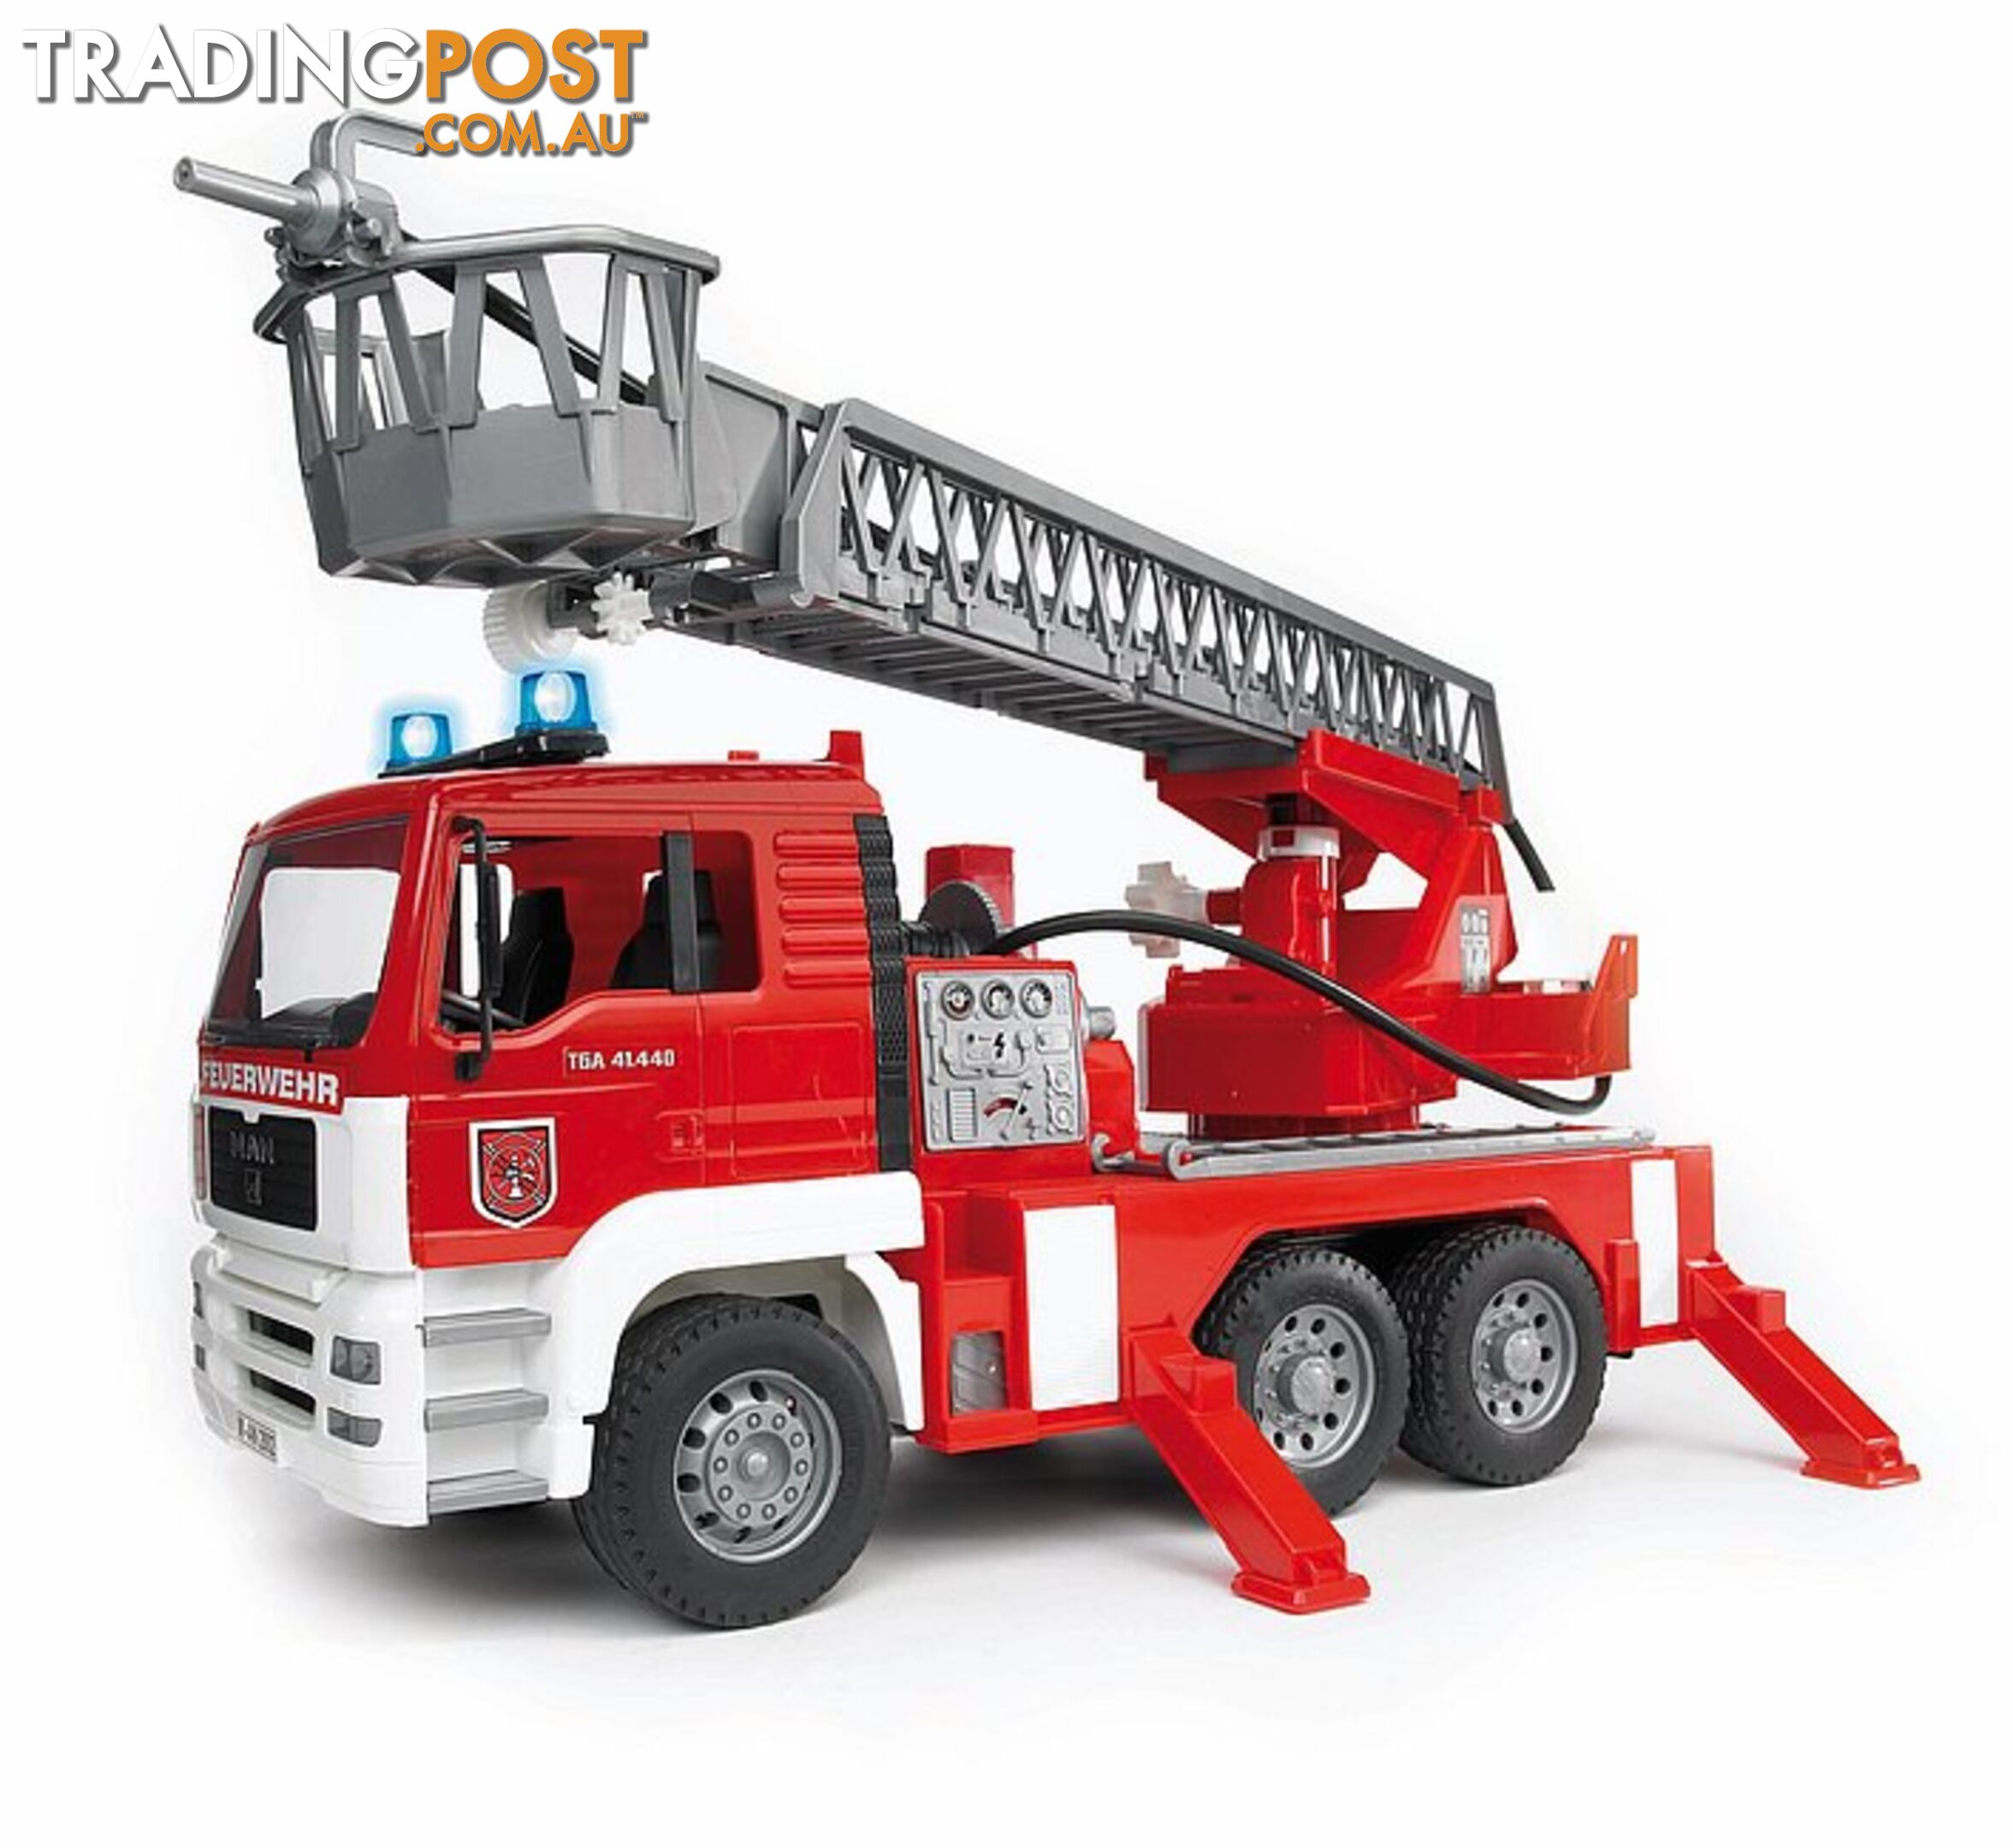 Bruder 1:16 Fire Engine Man Tga With Selwing Ladder - Zi24002771 - 4007702021711